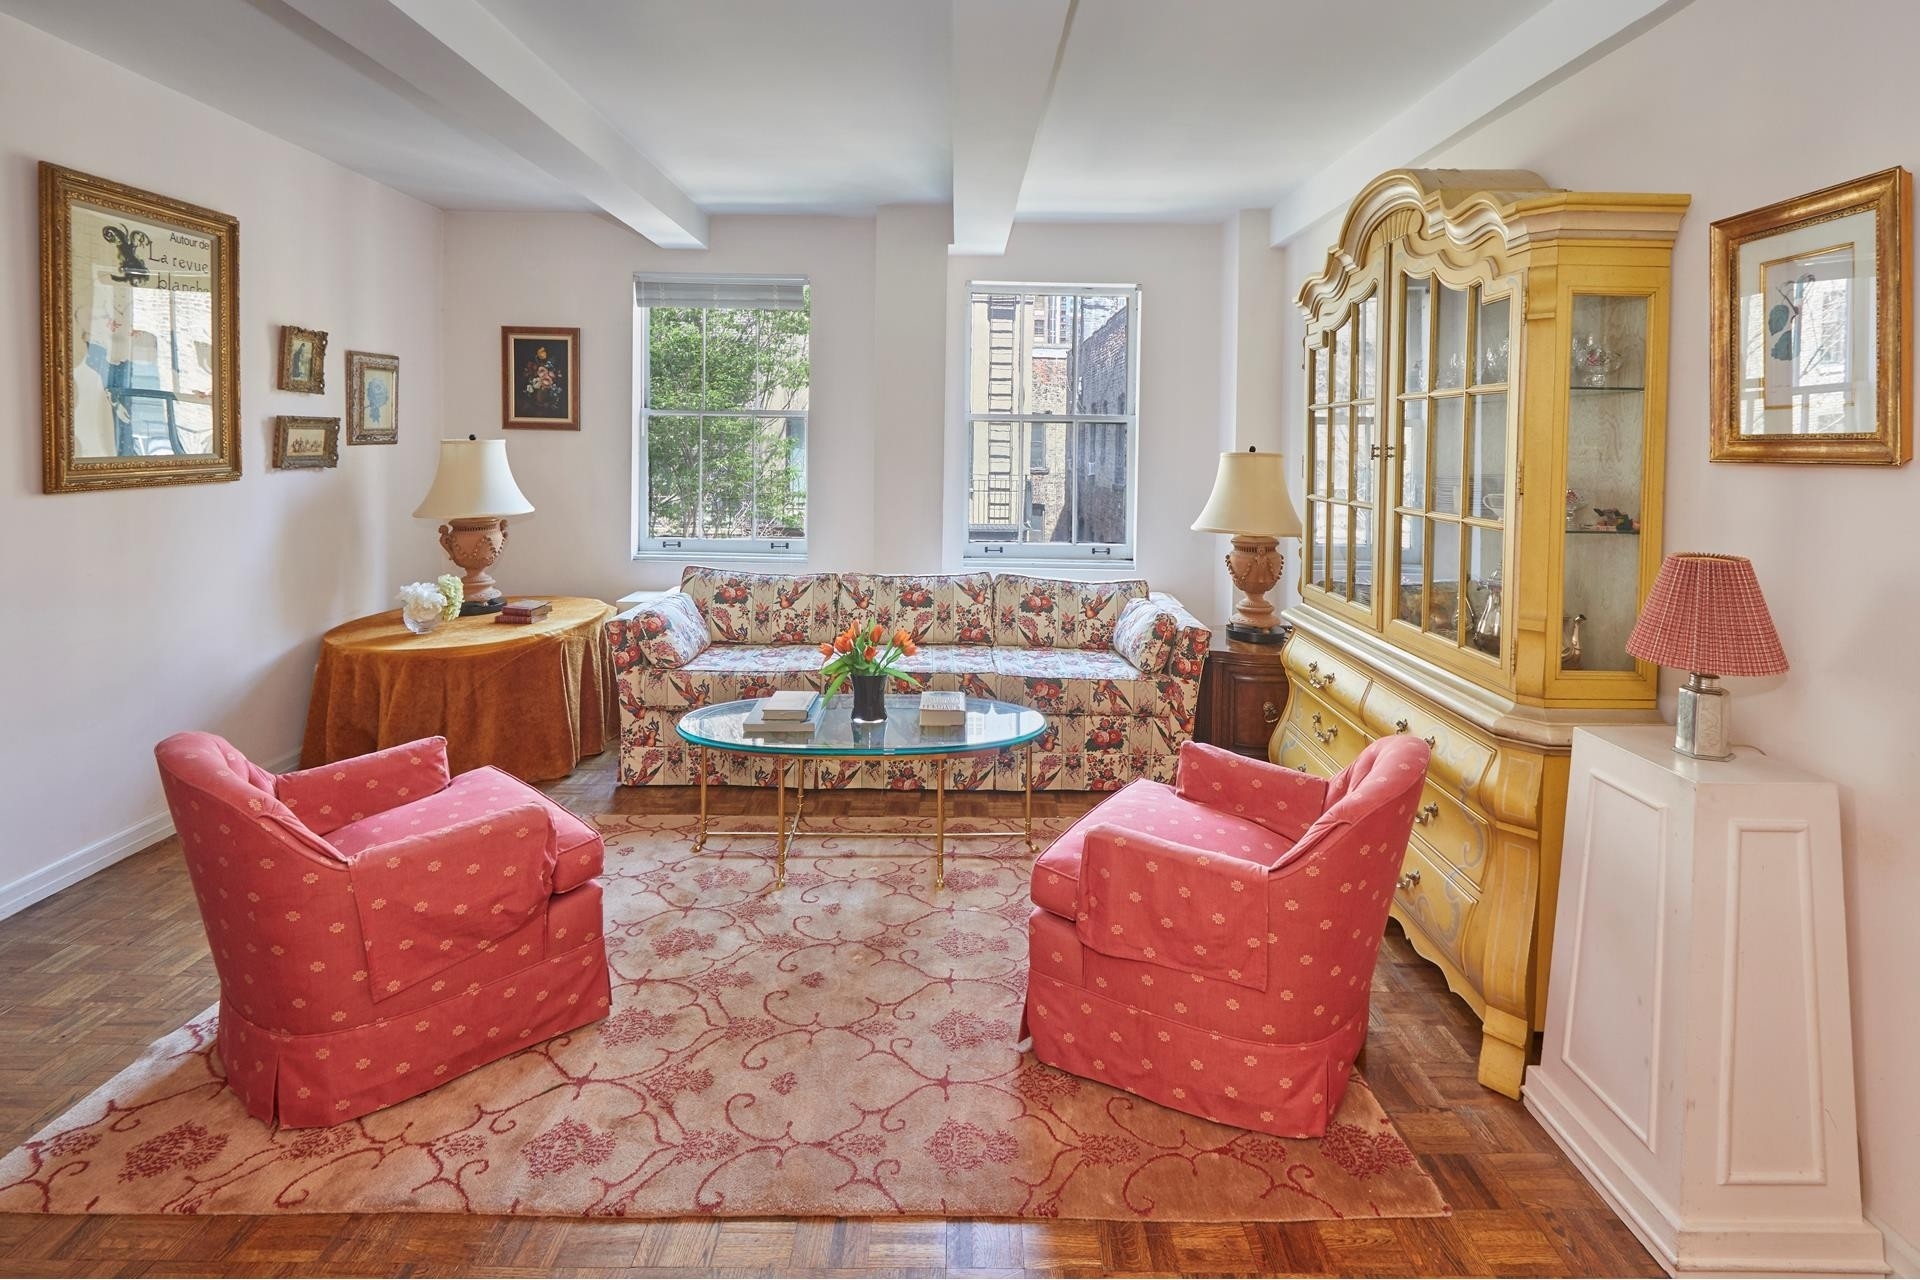 Co-op Properties for Sale at 235 E 49TH ST, 6F Turtle Bay, New York, NY 10017